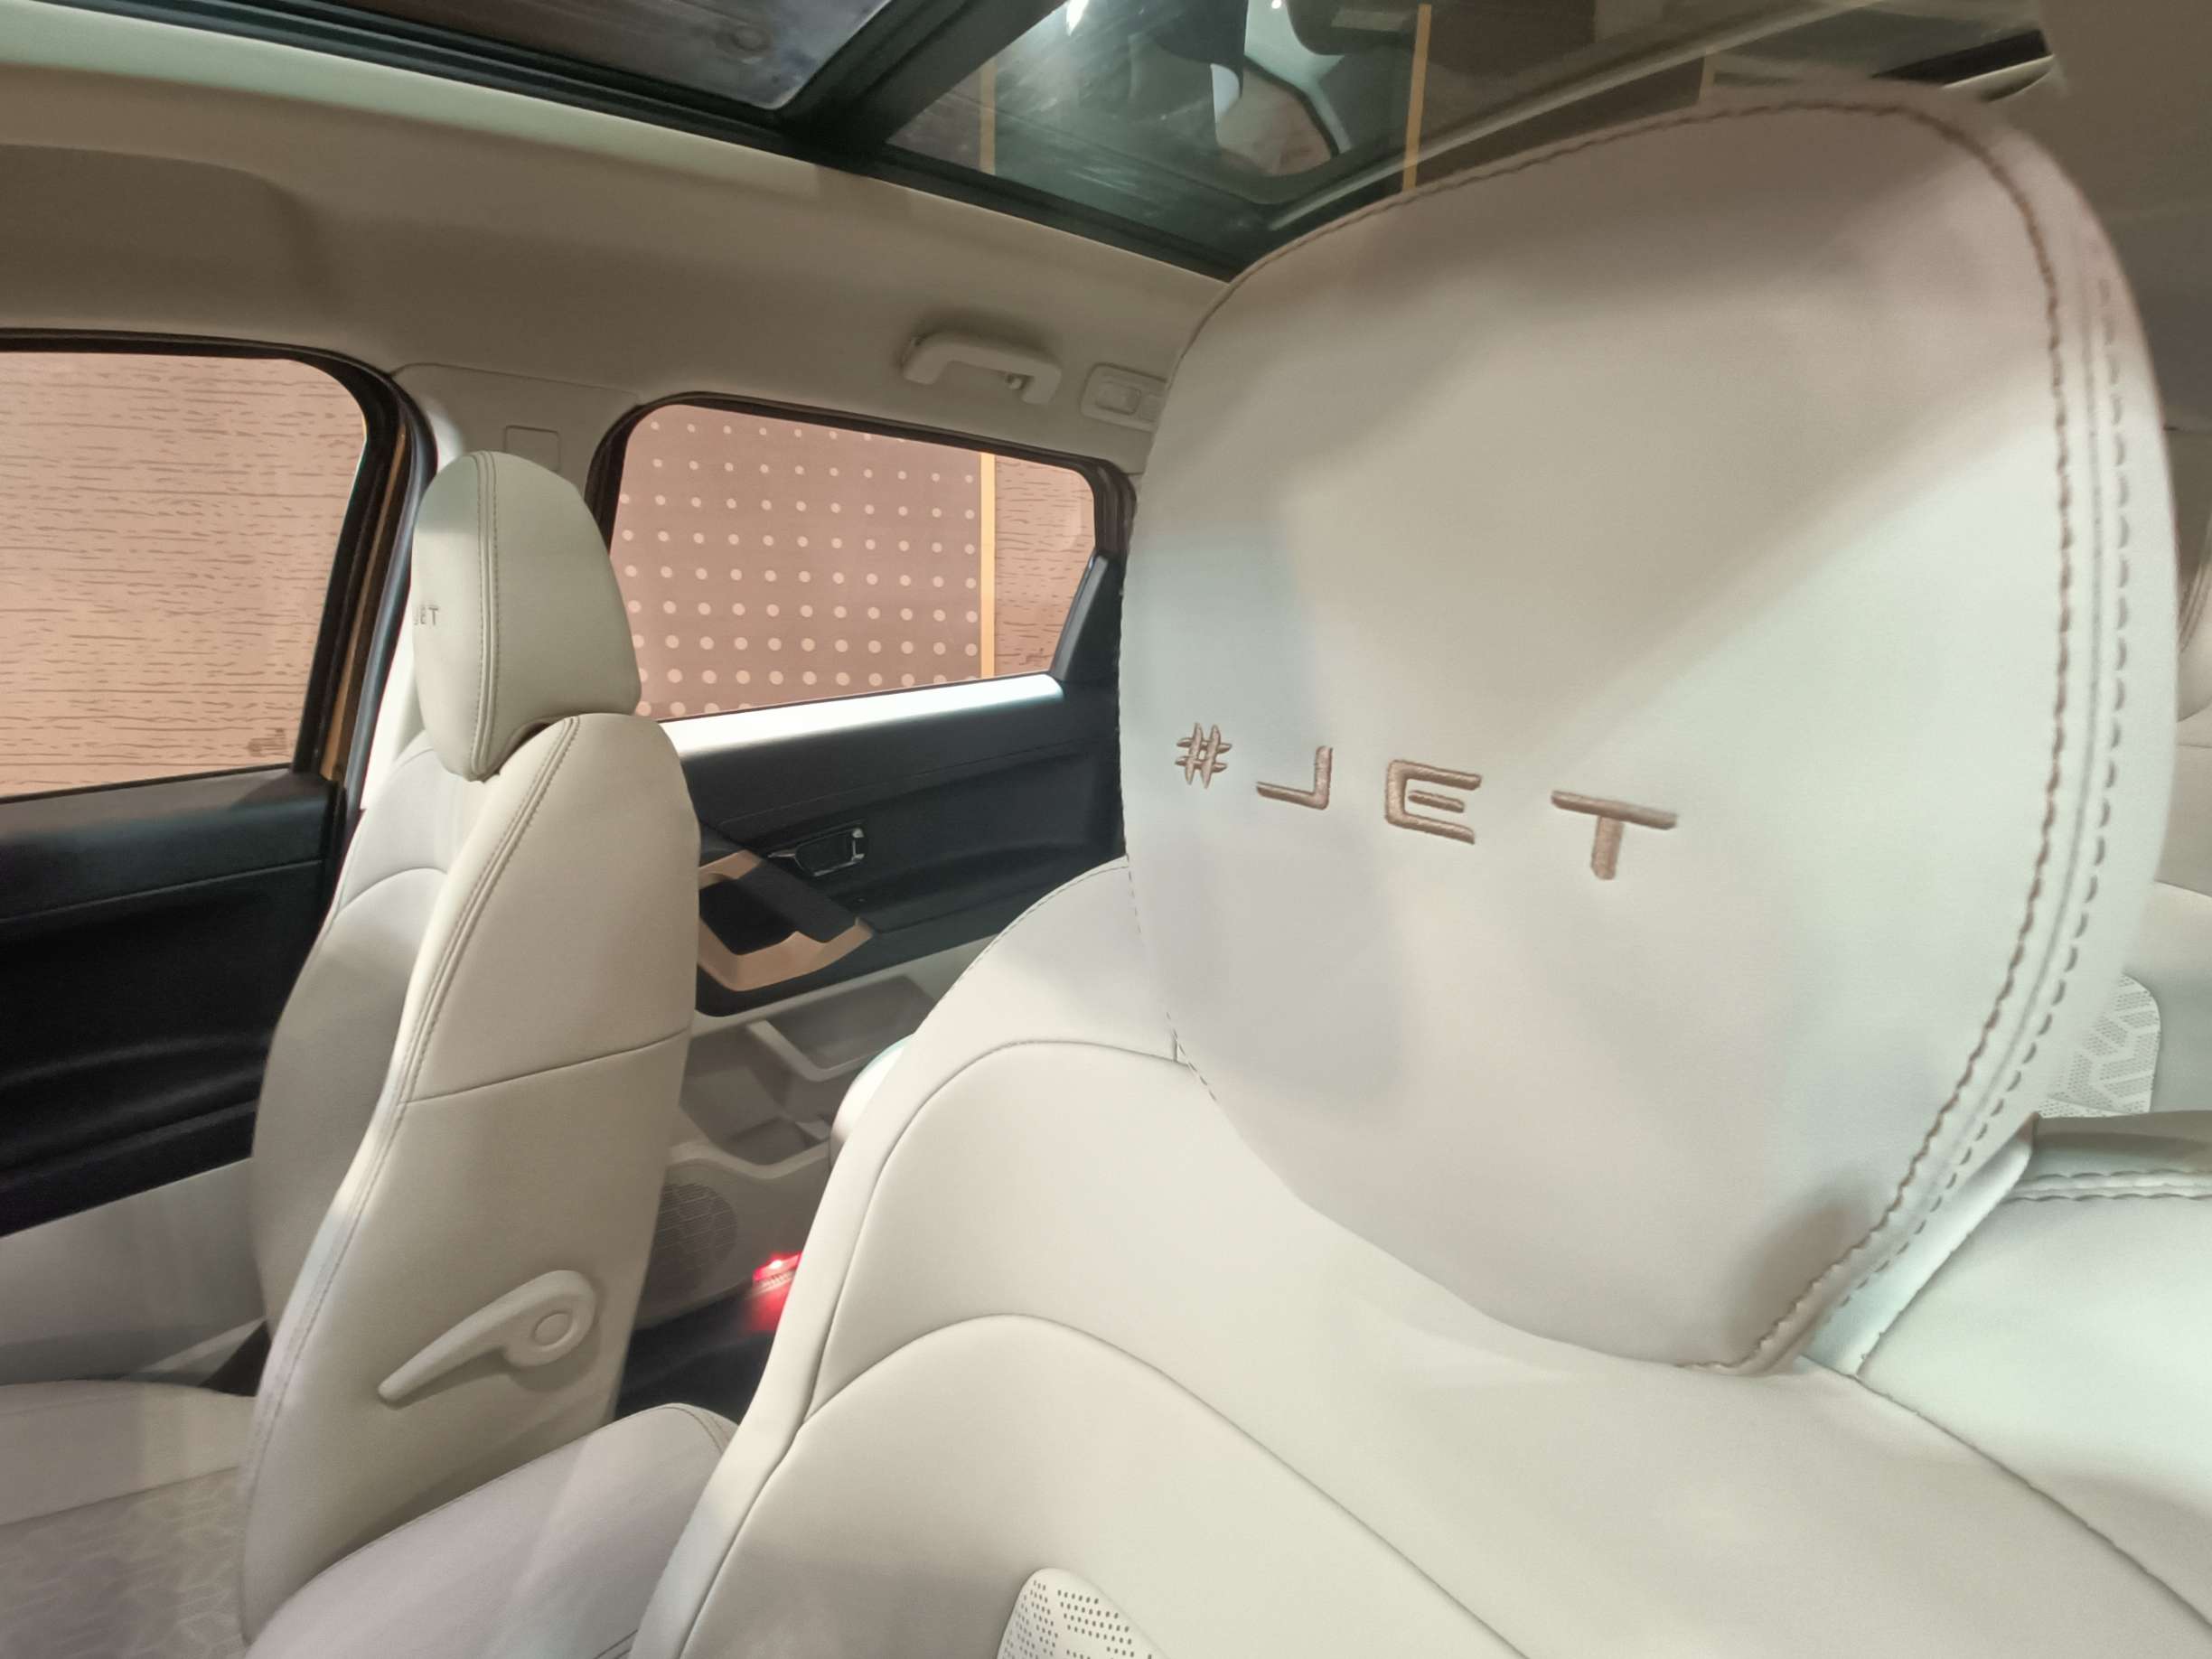 Tata Motors Jet Edition First Look - Check Specifications, Features And Prices